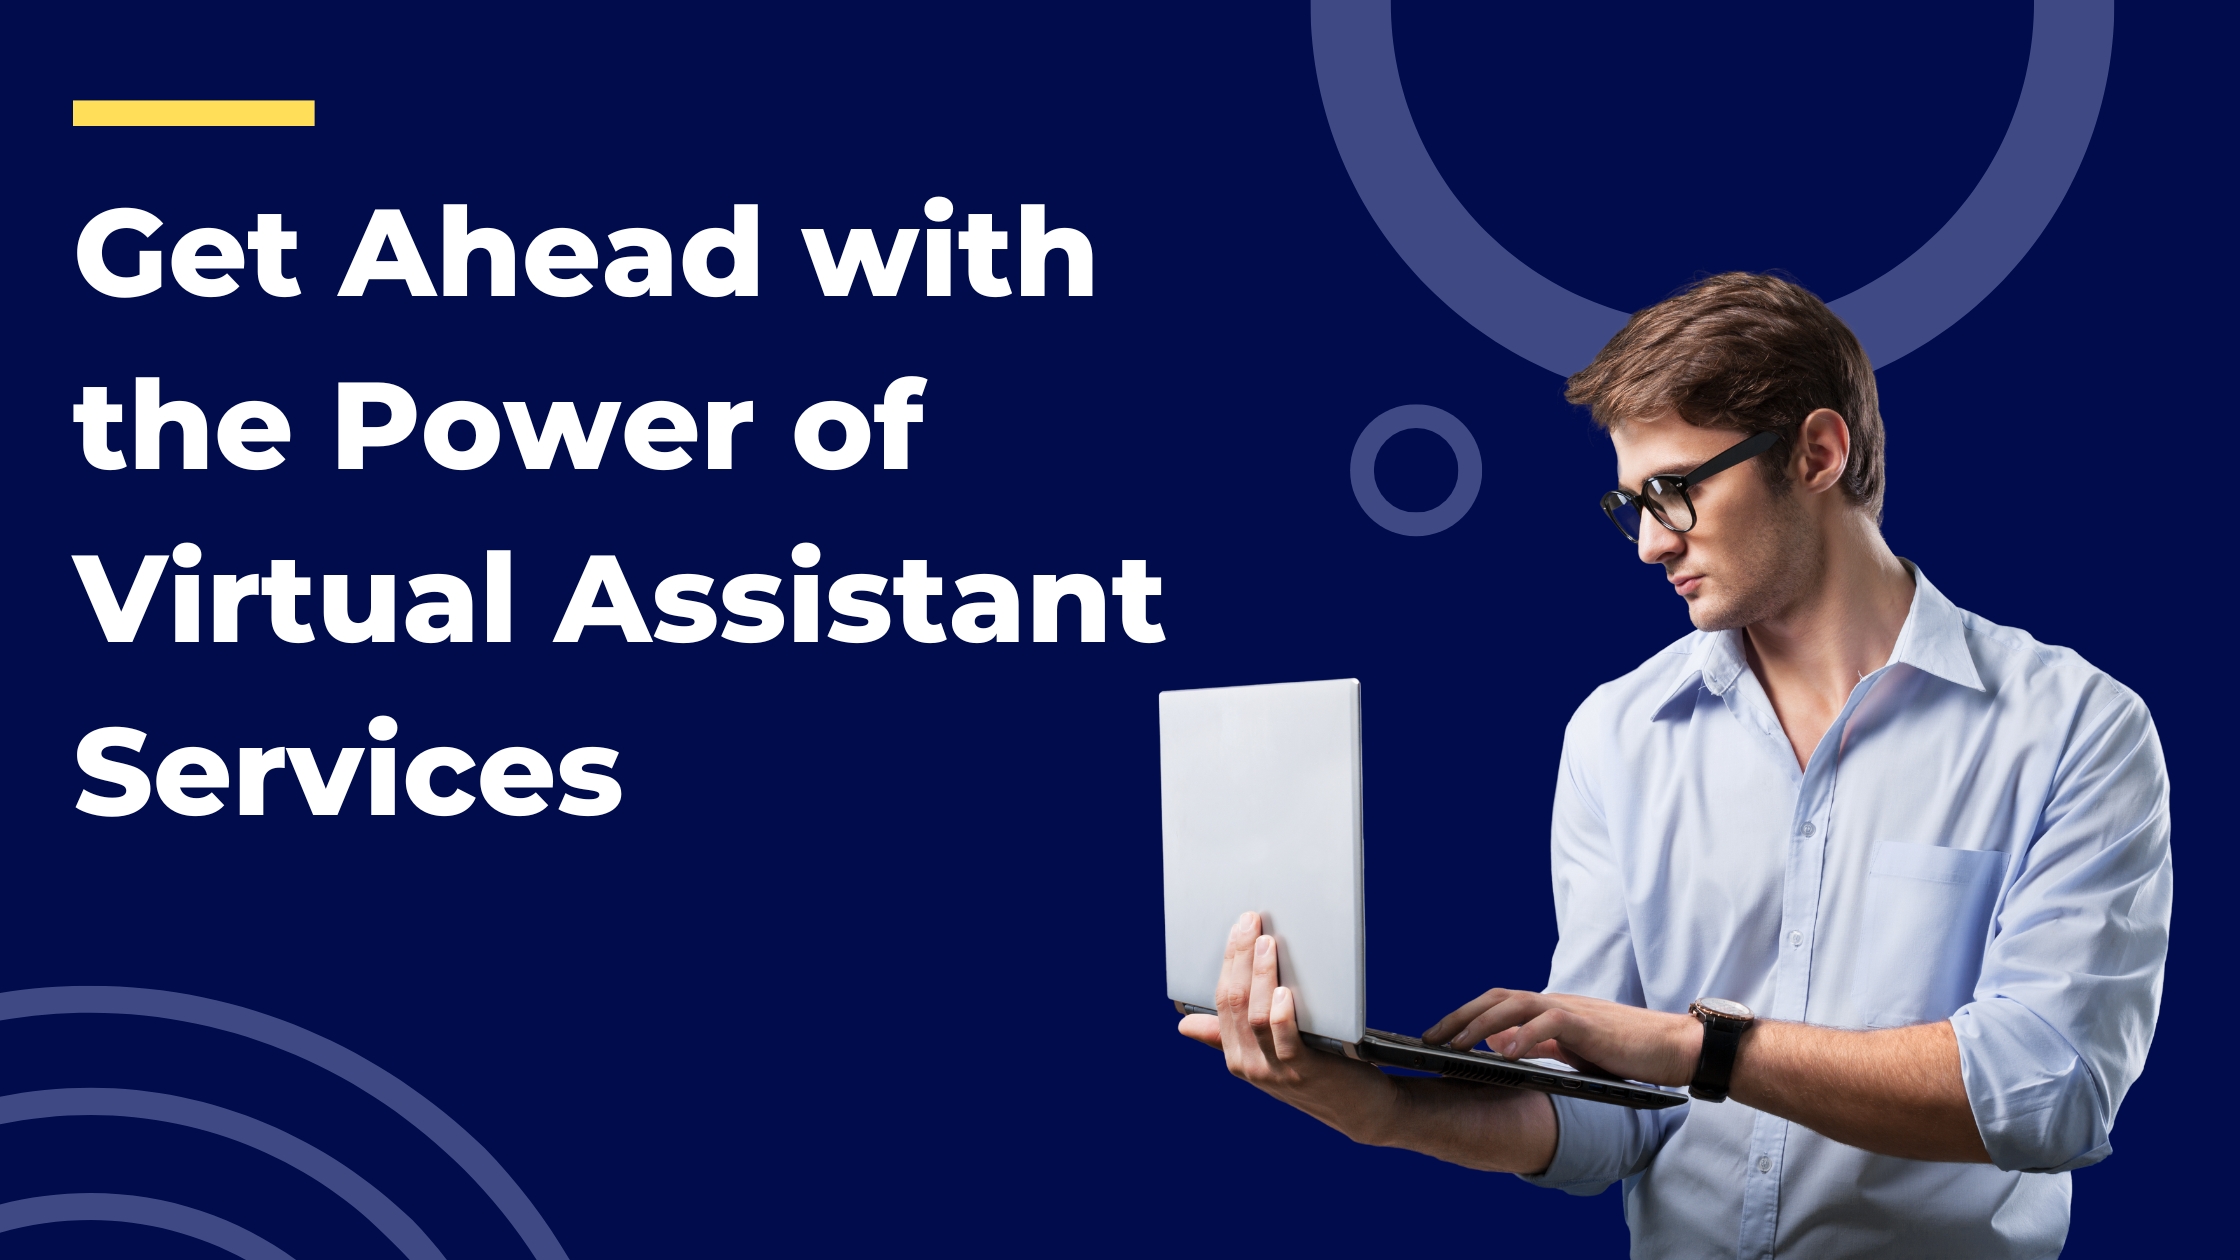 
Get Ahead with the Power of Virtual Assistance Services